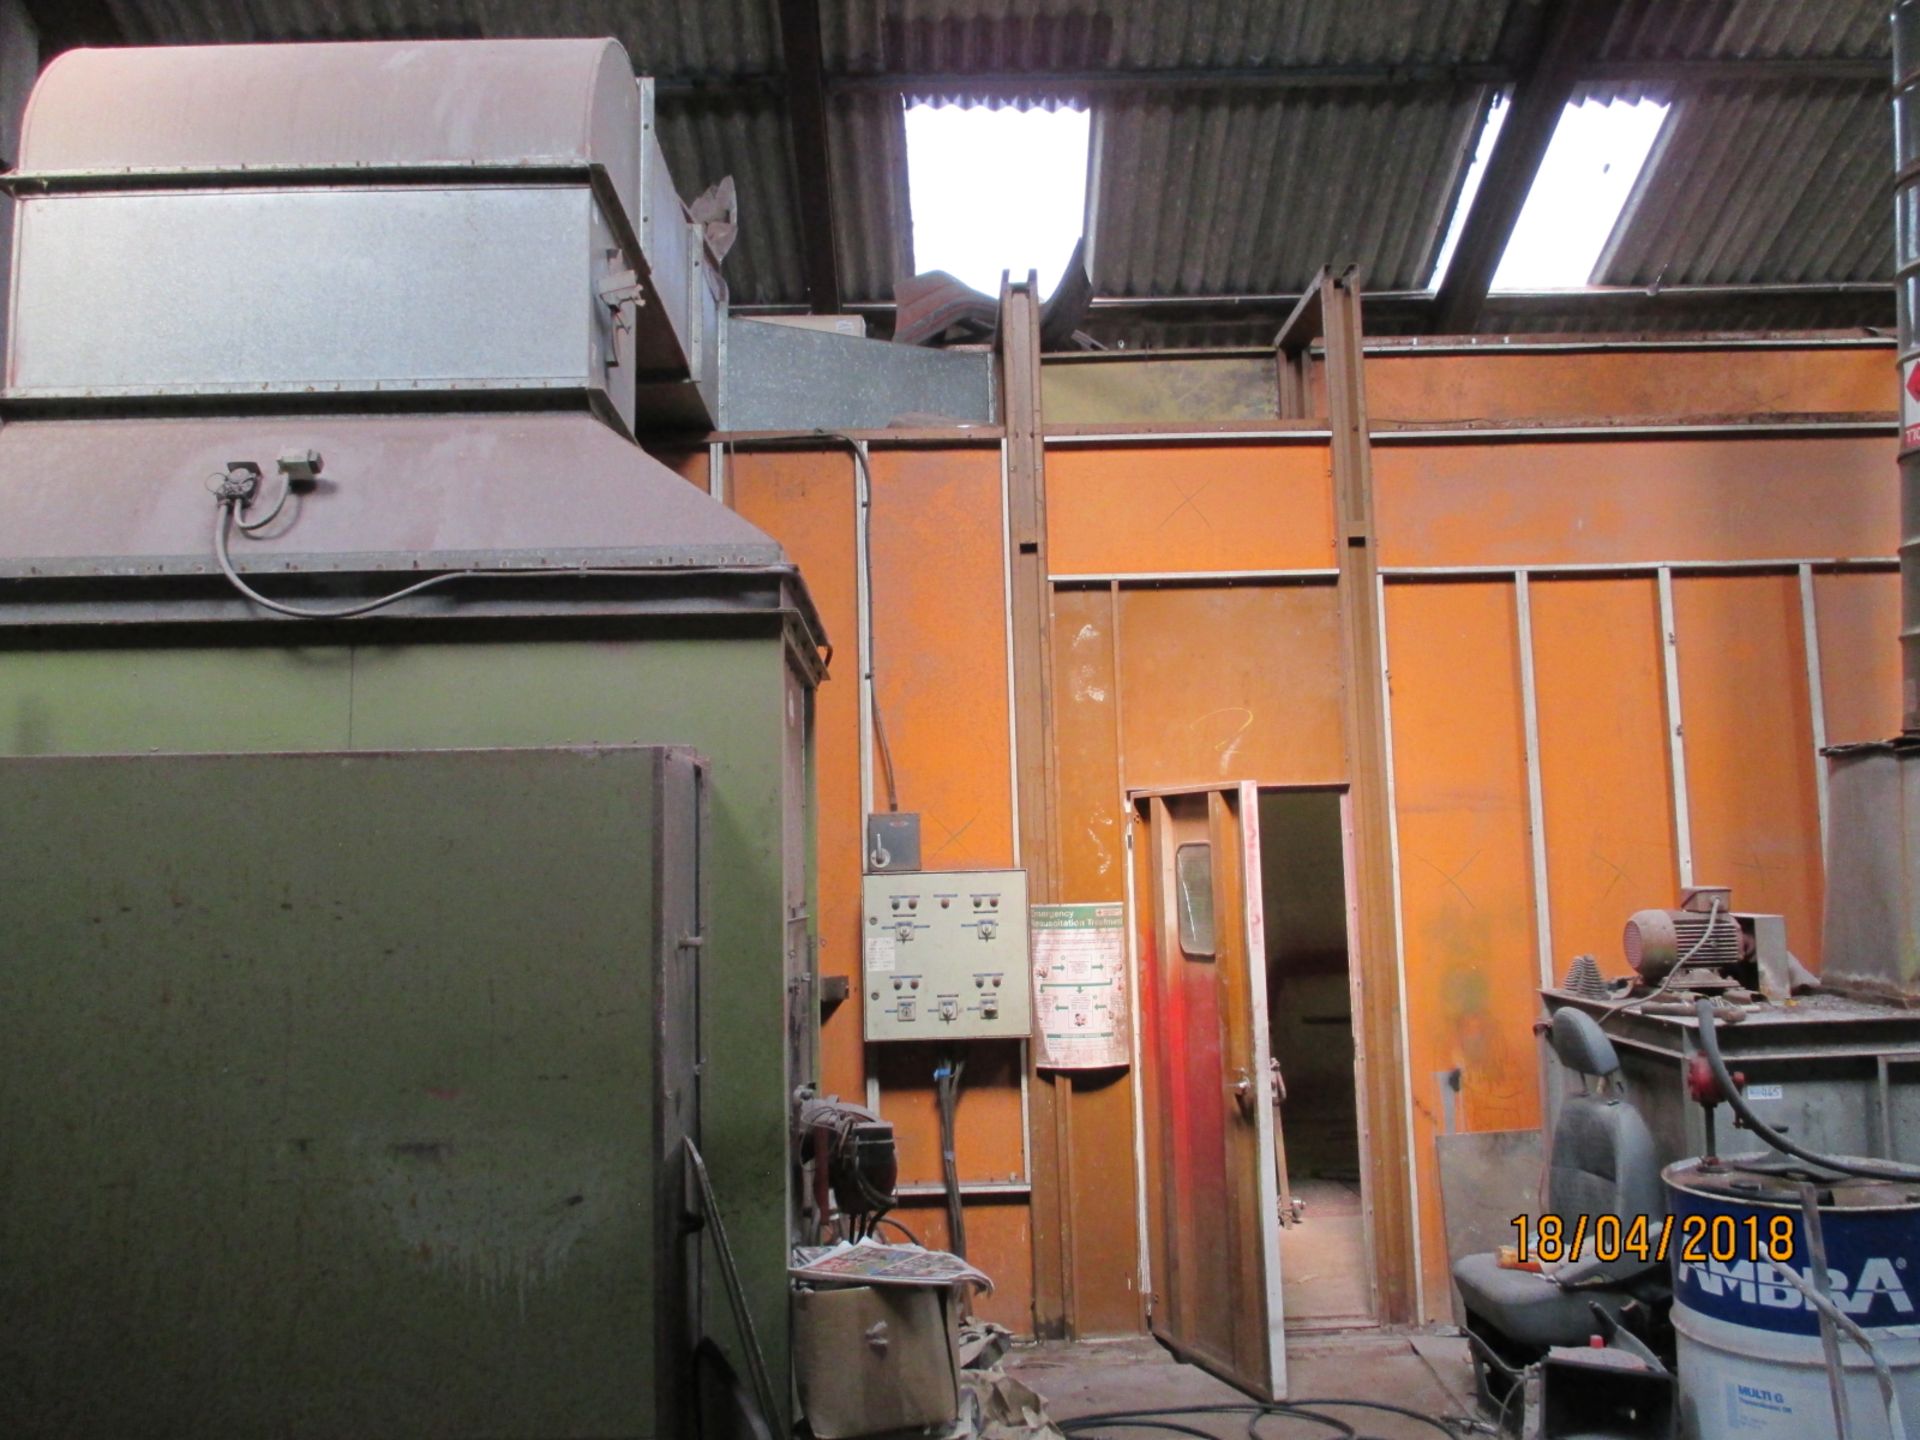 1 No. Large Volcan Paint Spray Booth cw Volcan Burner Drying Unit And Extractor Unit - Image 4 of 5